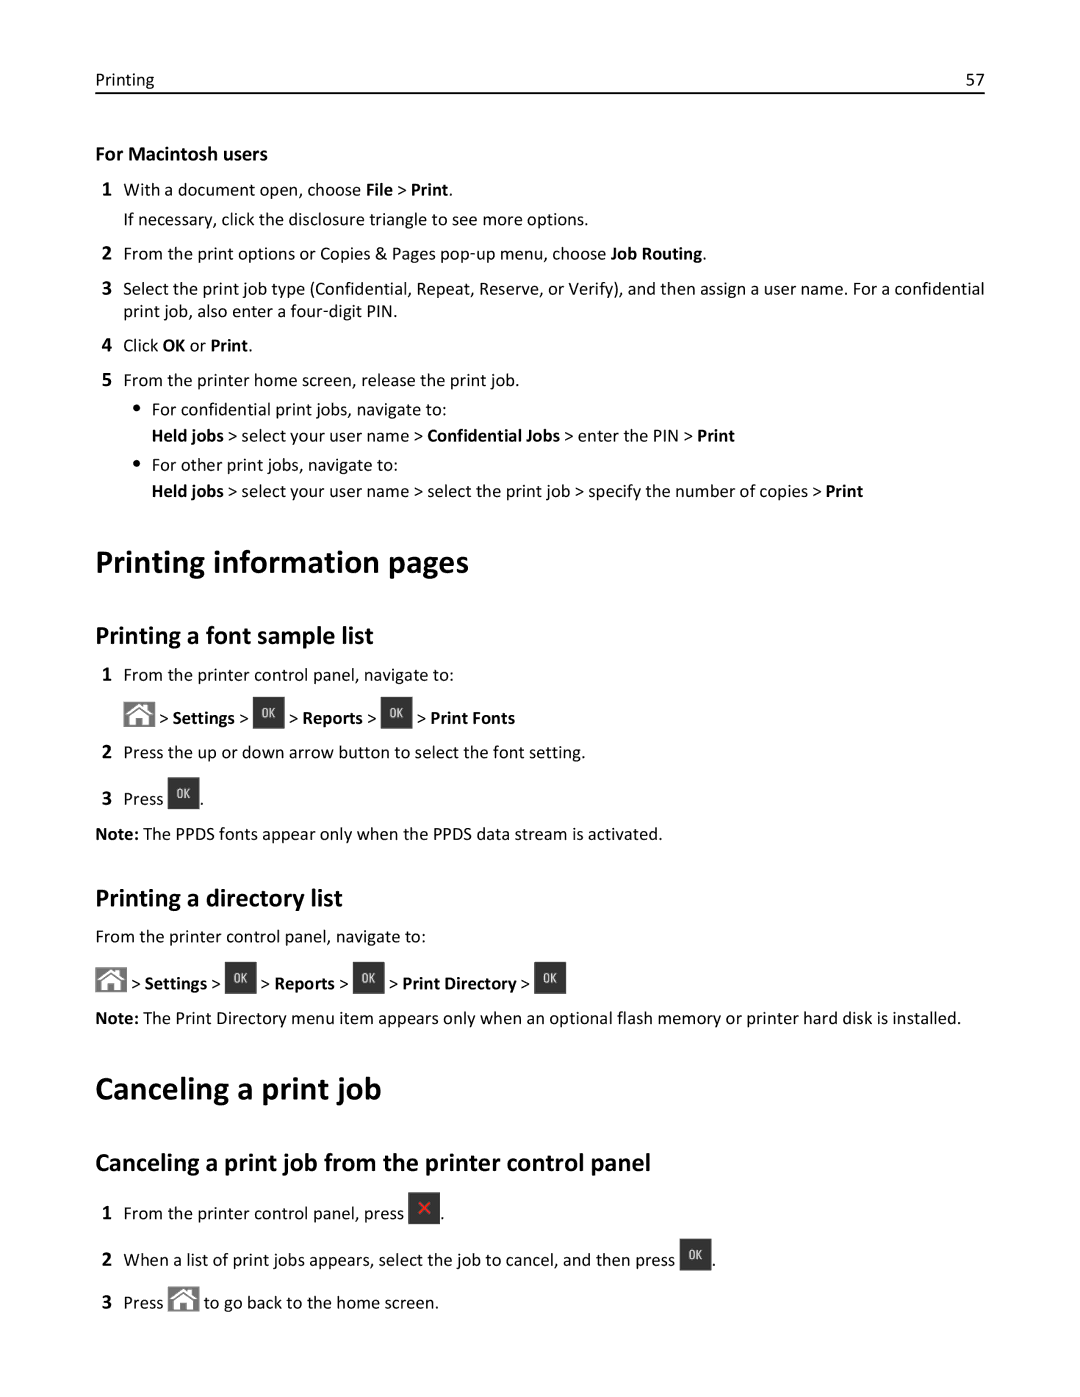 Lexmark CS410 Printing information pages, Canceling a print job, Printing a font sample list, Printing a directory list 